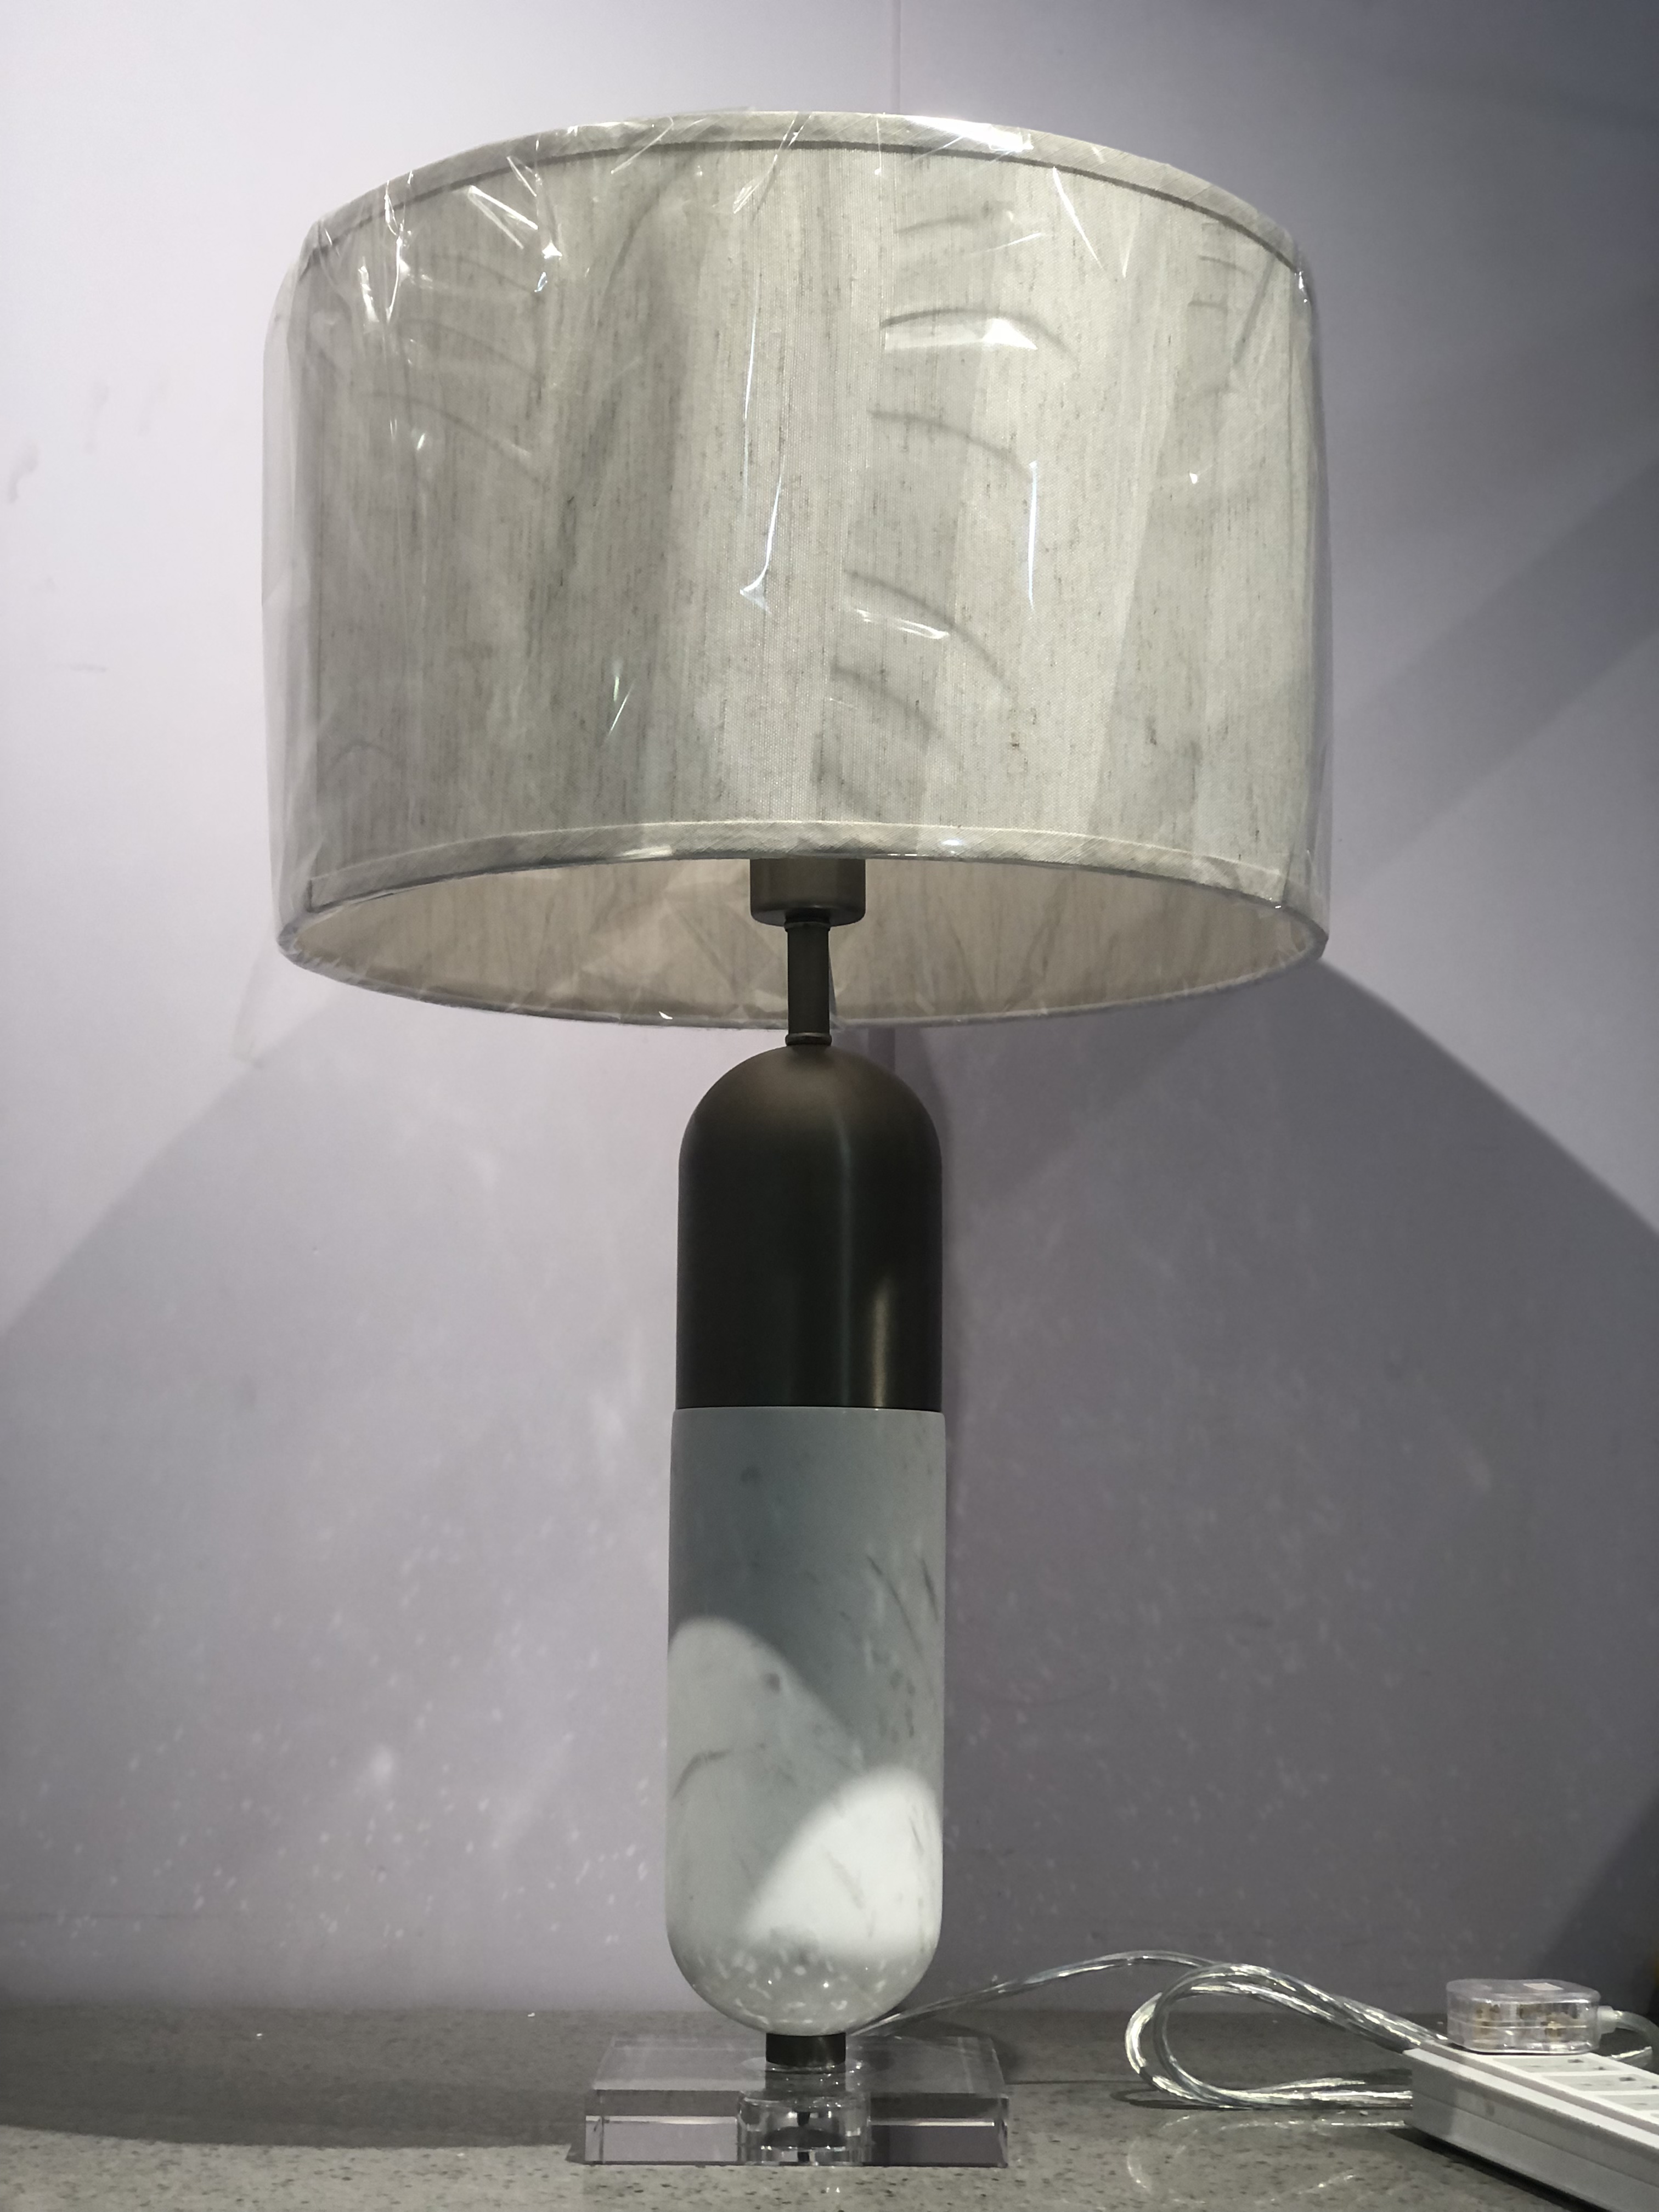 Comtemparary Amazing Mable Metal Fabric Table Lamp in Bedroom (KIZ-84T)